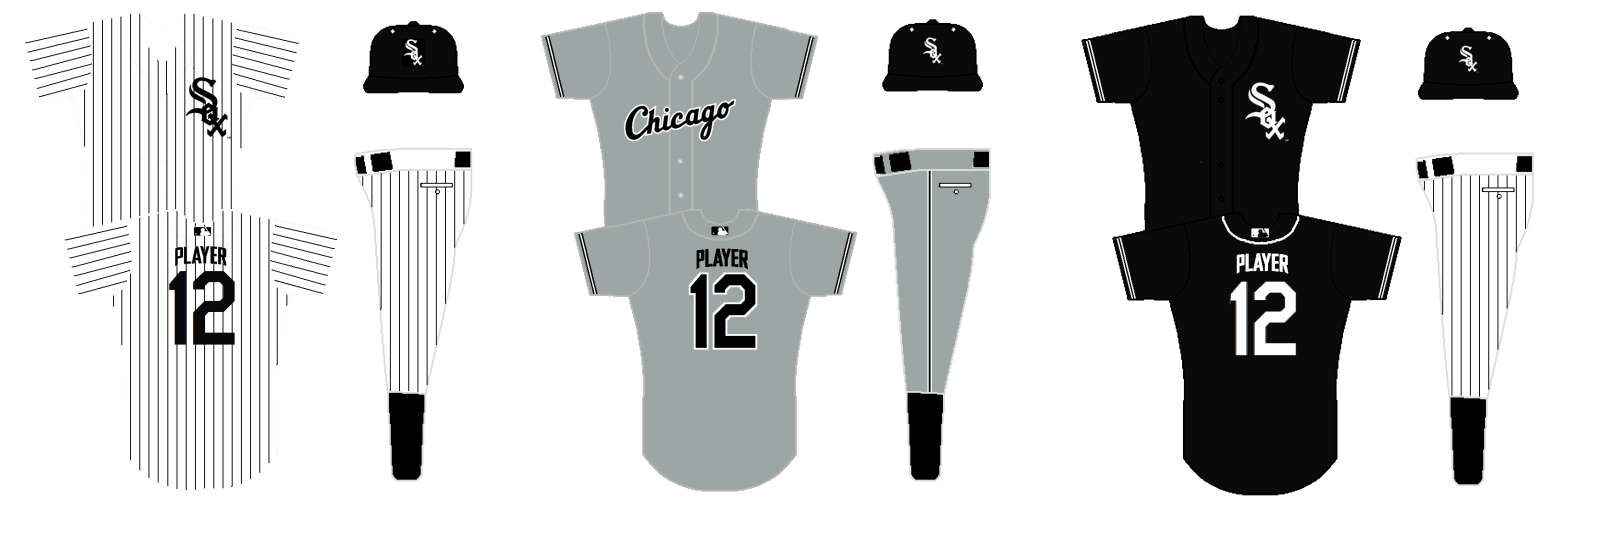 WhiteSoxConcept2Final.png